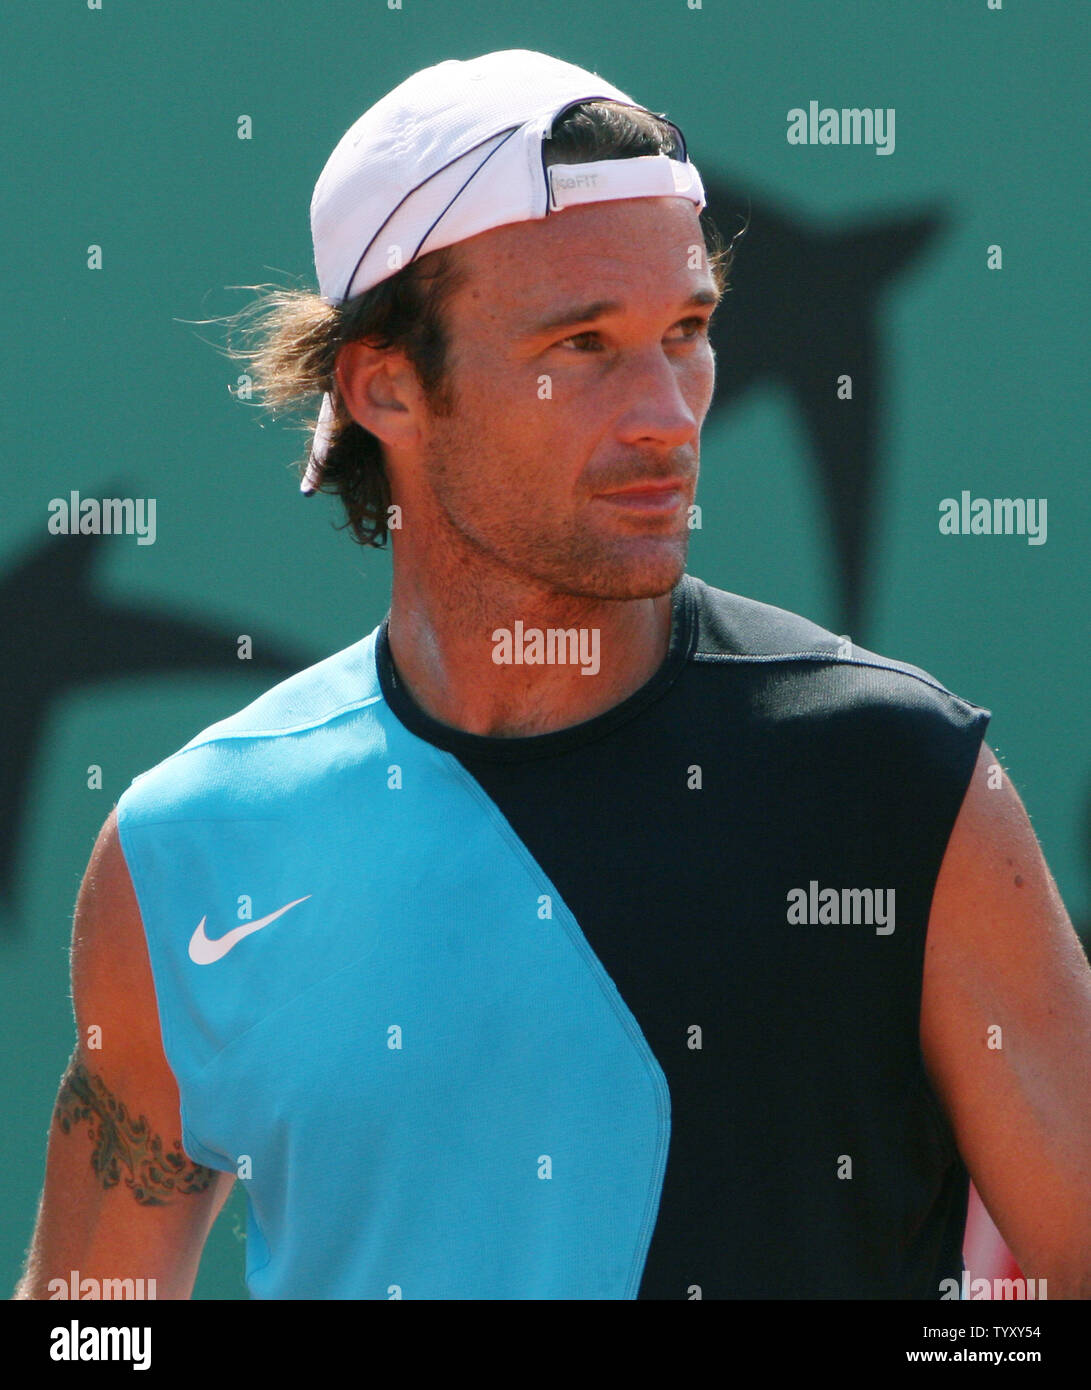 Spaniard Carlos Moya focuses during a break in his third round match against Argentinian Juan Pablo Brzezicki at the French Open at Roland Garros in Paris on June 2, 2007.  Moya, the number 23 seed, defeated the unseeded Brzezicki in straight sets 6-1, 6-3, 7-5.   (UPI Photo/ David Silpa) Stock Photo